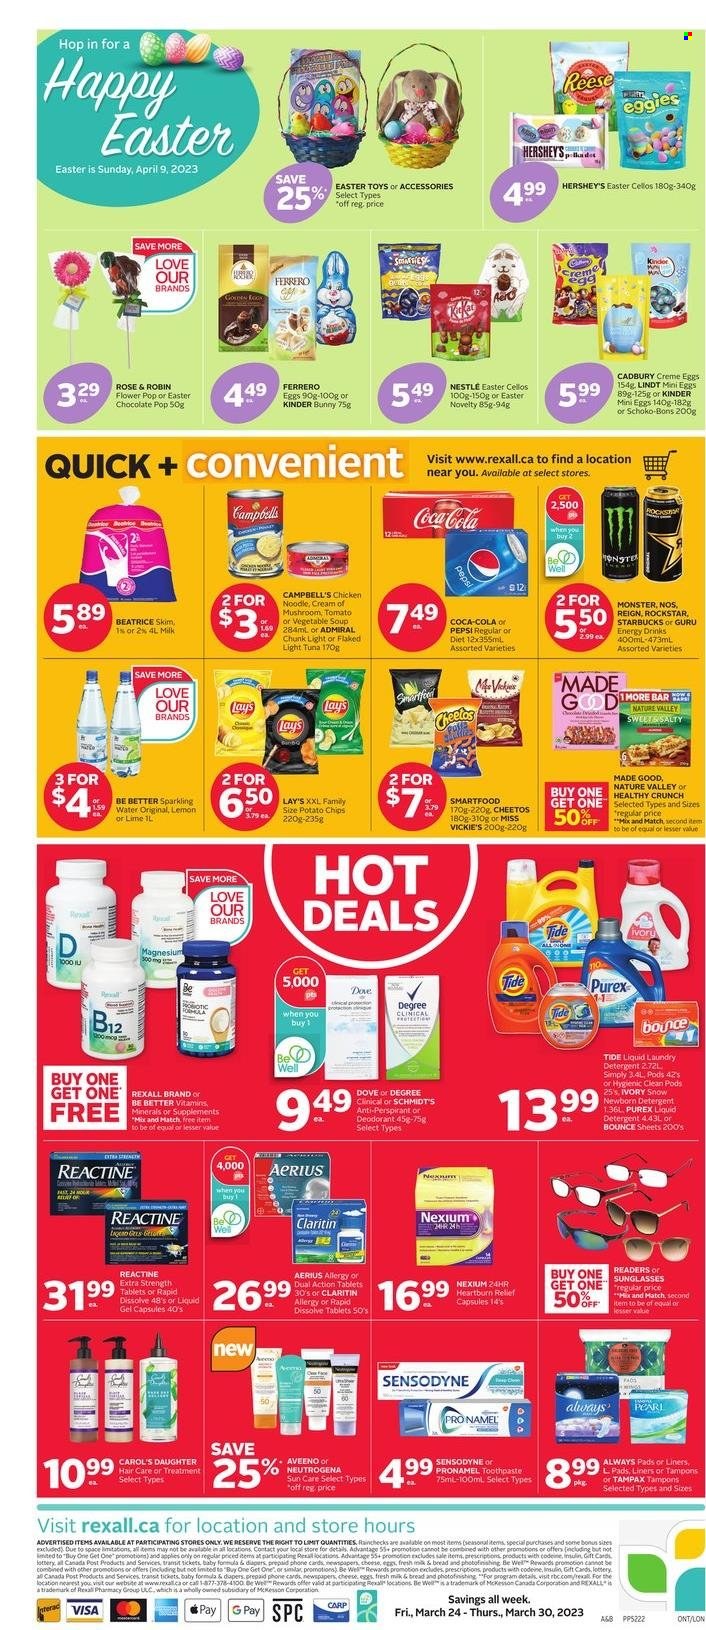 thumbnail - Rexall Flyer - March 24, 2023 - March 30, 2023 - Sales products - bread, soup, Dove, chocolate, Hershey's, Cadbury, potato chips, Cheetos, chips, Lay’s, Smartfood, tuna, light tuna, Nature Valley, noodles, Campbell's, Coca-Cola, Pepsi, energy drink, Monster, Rockstar, water, Starbucks, wine, rosé wine, nappies, Aveeno, Tide, liquid detergent, laundry detergent, Bounce, Purex, toothpaste, Always pads, sanitary pads, tampons, anti-perspirant, sunglasses, magnesium, Nexium, detergent, Nestlé, Neutrogena, Tampax, Sensodyne, Lindt, Ferrero Rocher, Smarties, deodorant. Page 2.